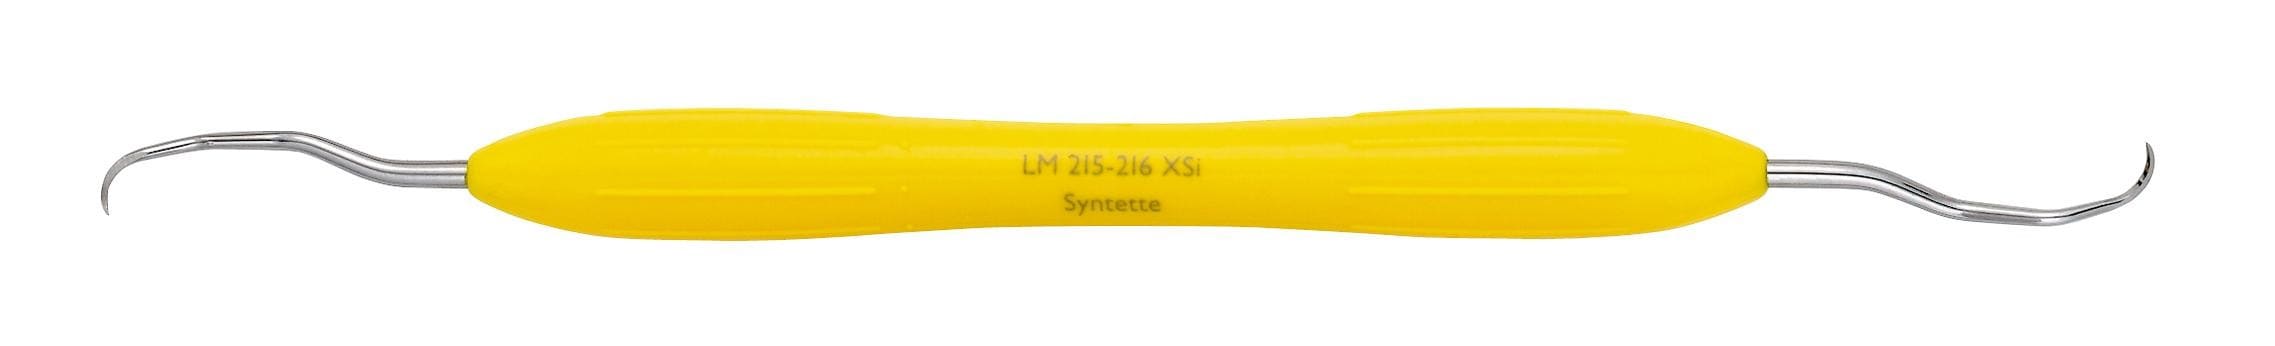 LM Syntette 215-216 XSI 